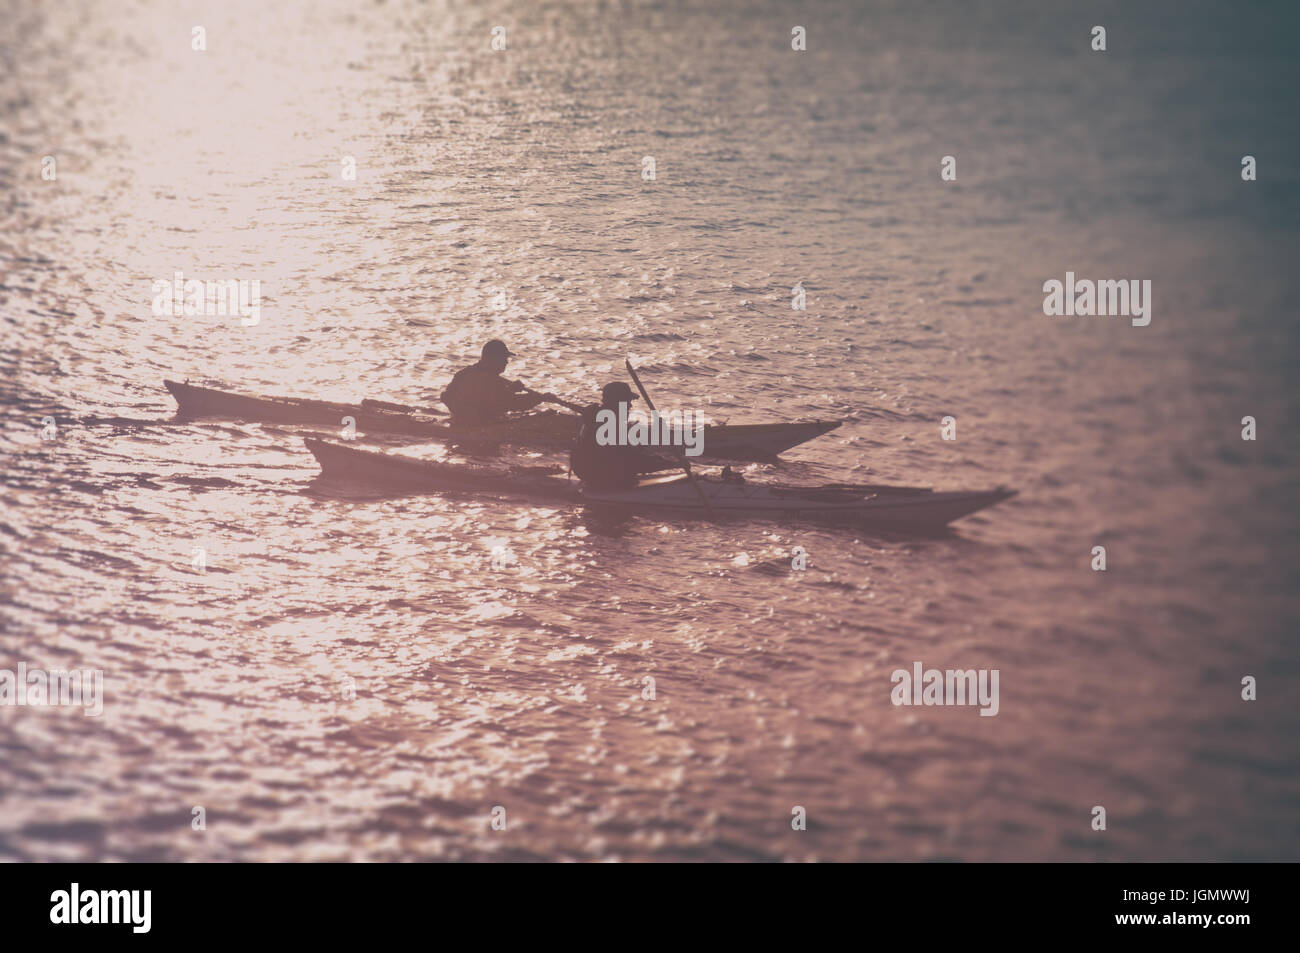 Two kayaks rowing at in sunset sea. Travel background Stock Photo